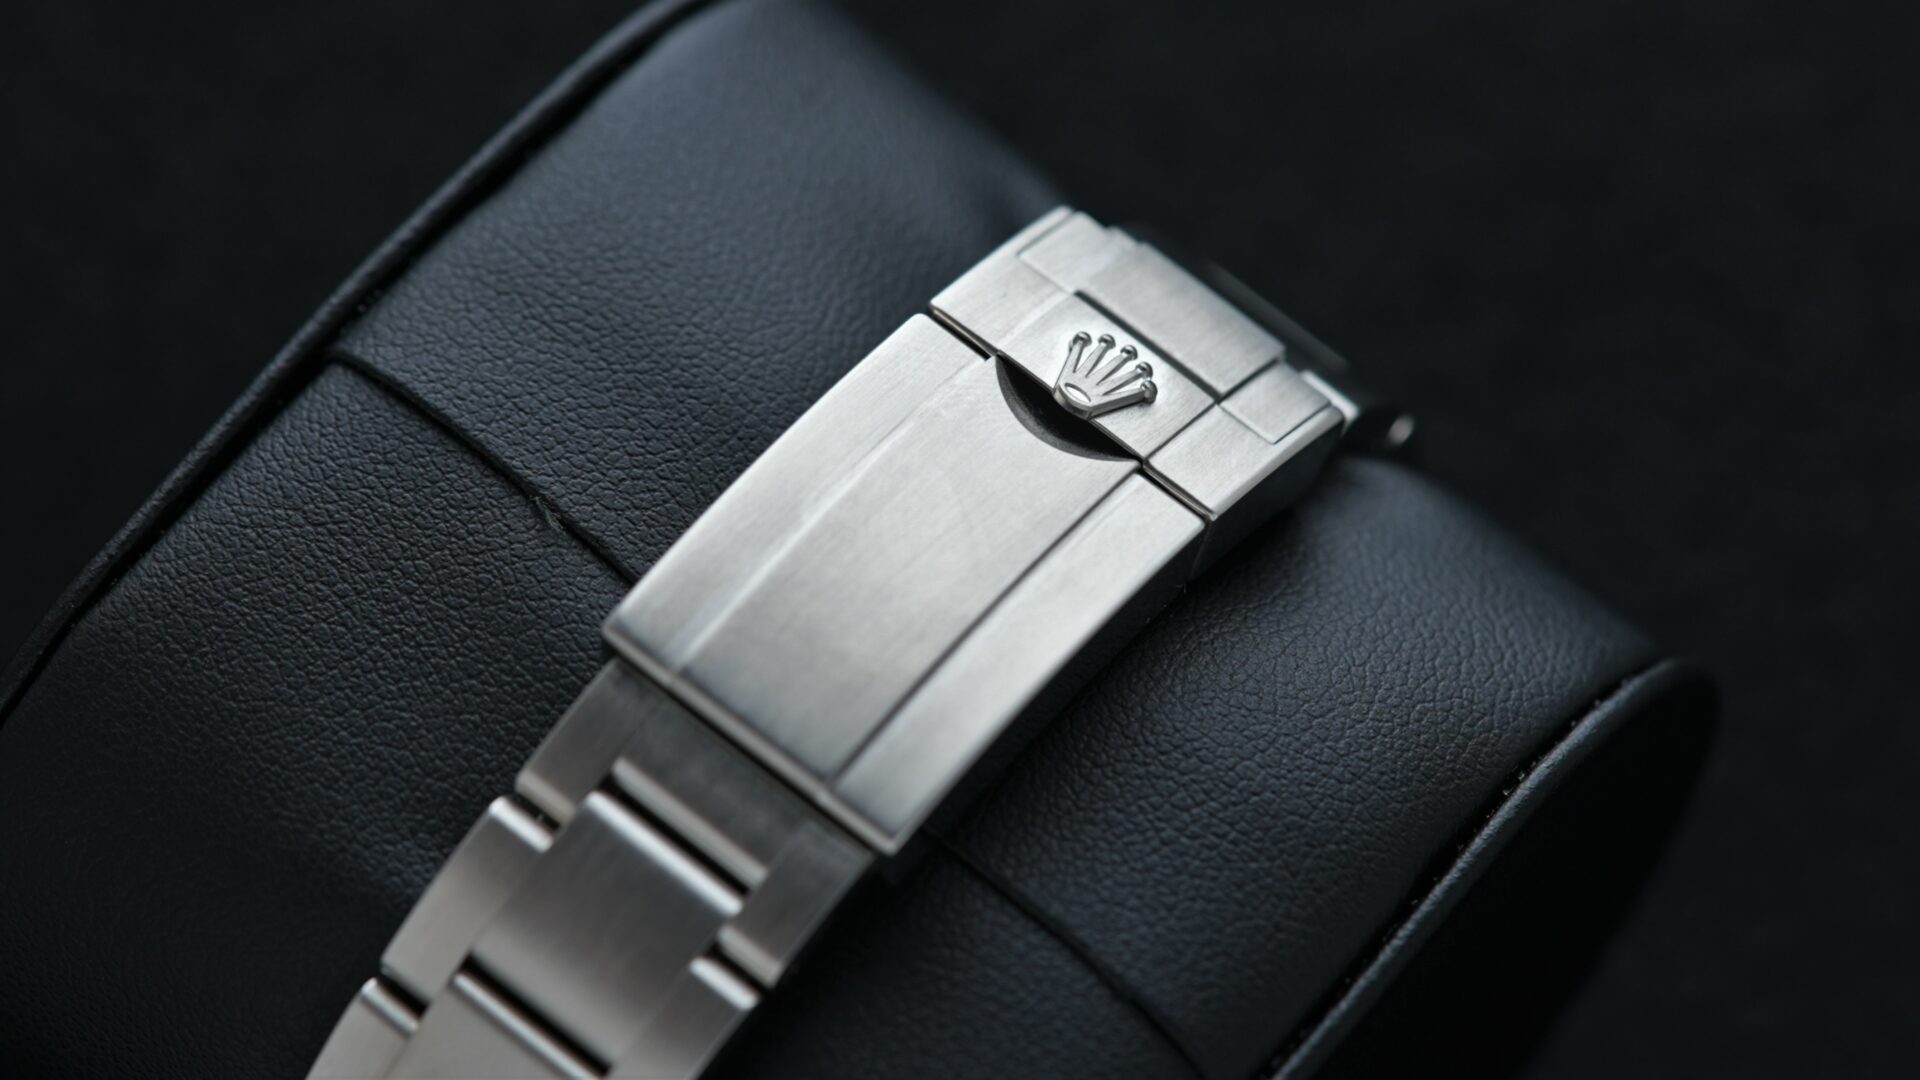 Bracelet and fold clasp on the Rolex Explorer 214270 39mm watch.